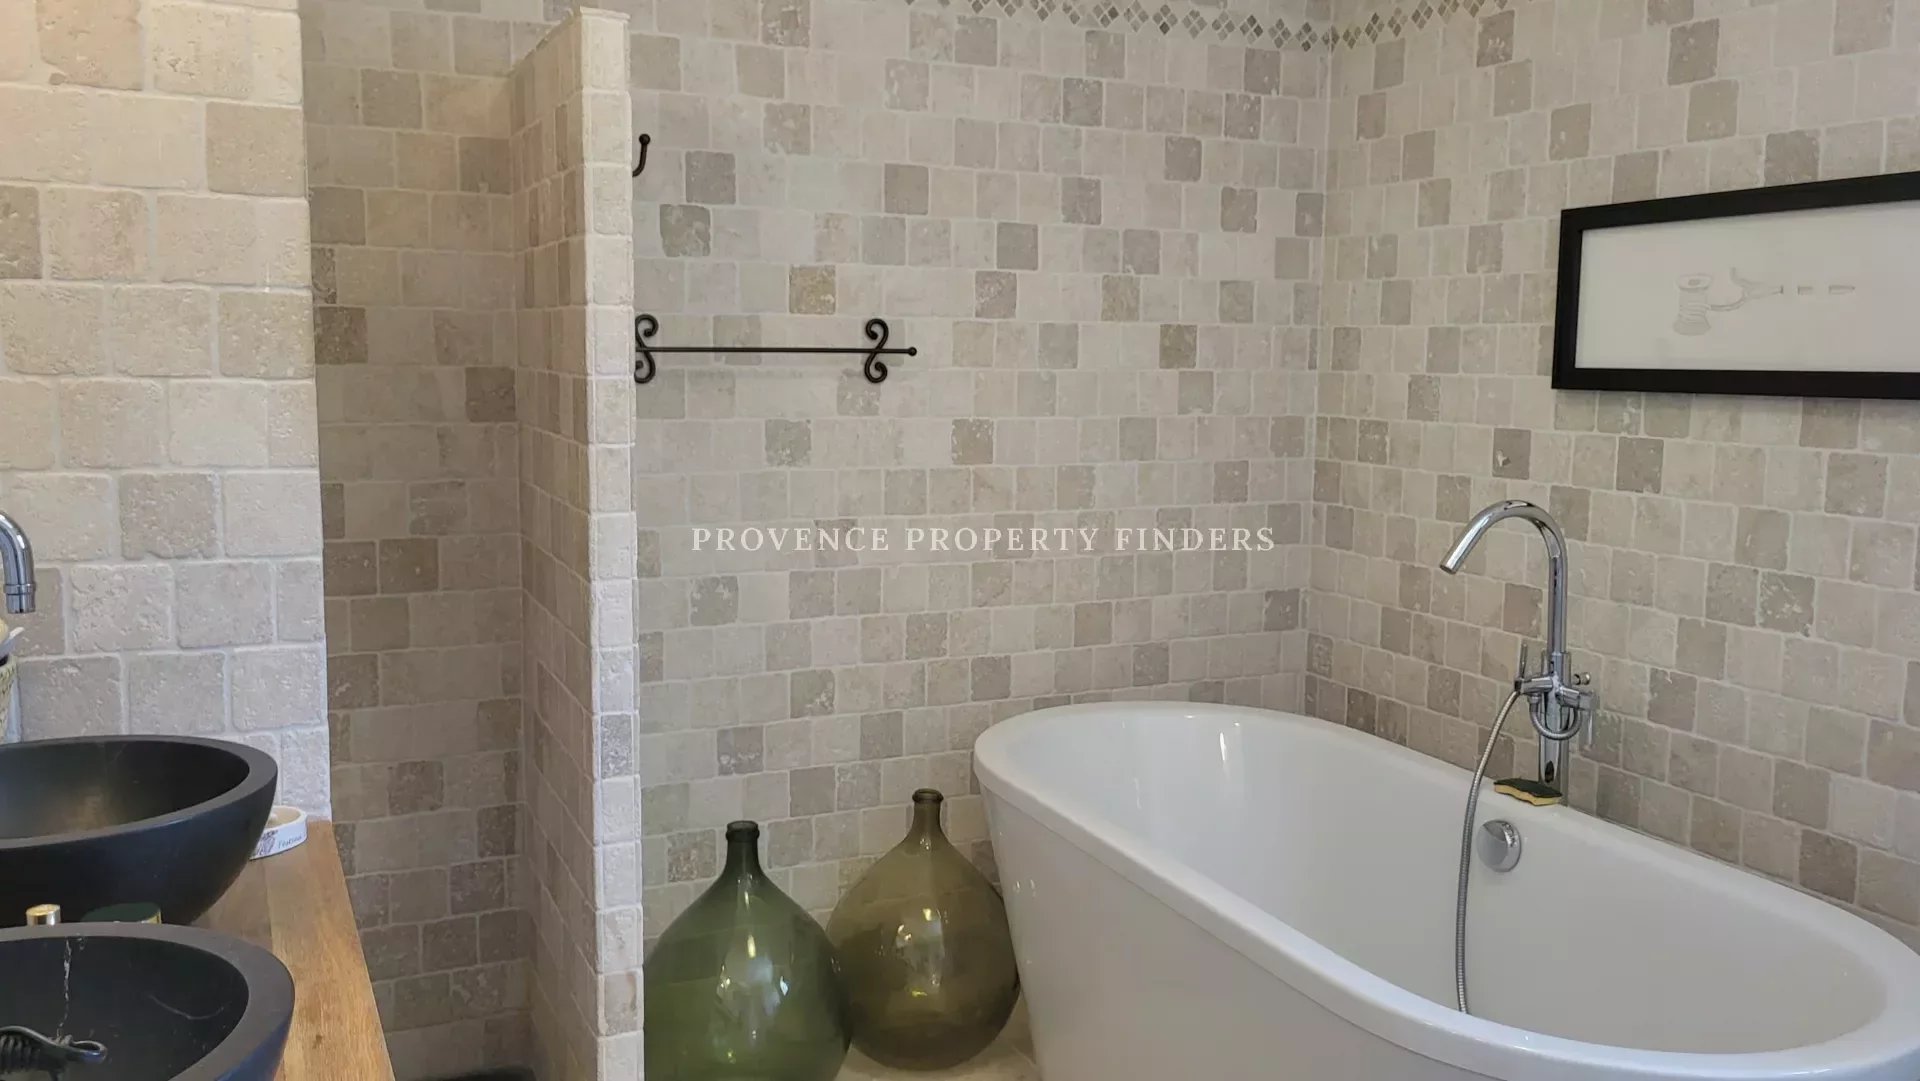 Provençal Villa of 220m2 offering you all  the comfort in the beautiful Provence.